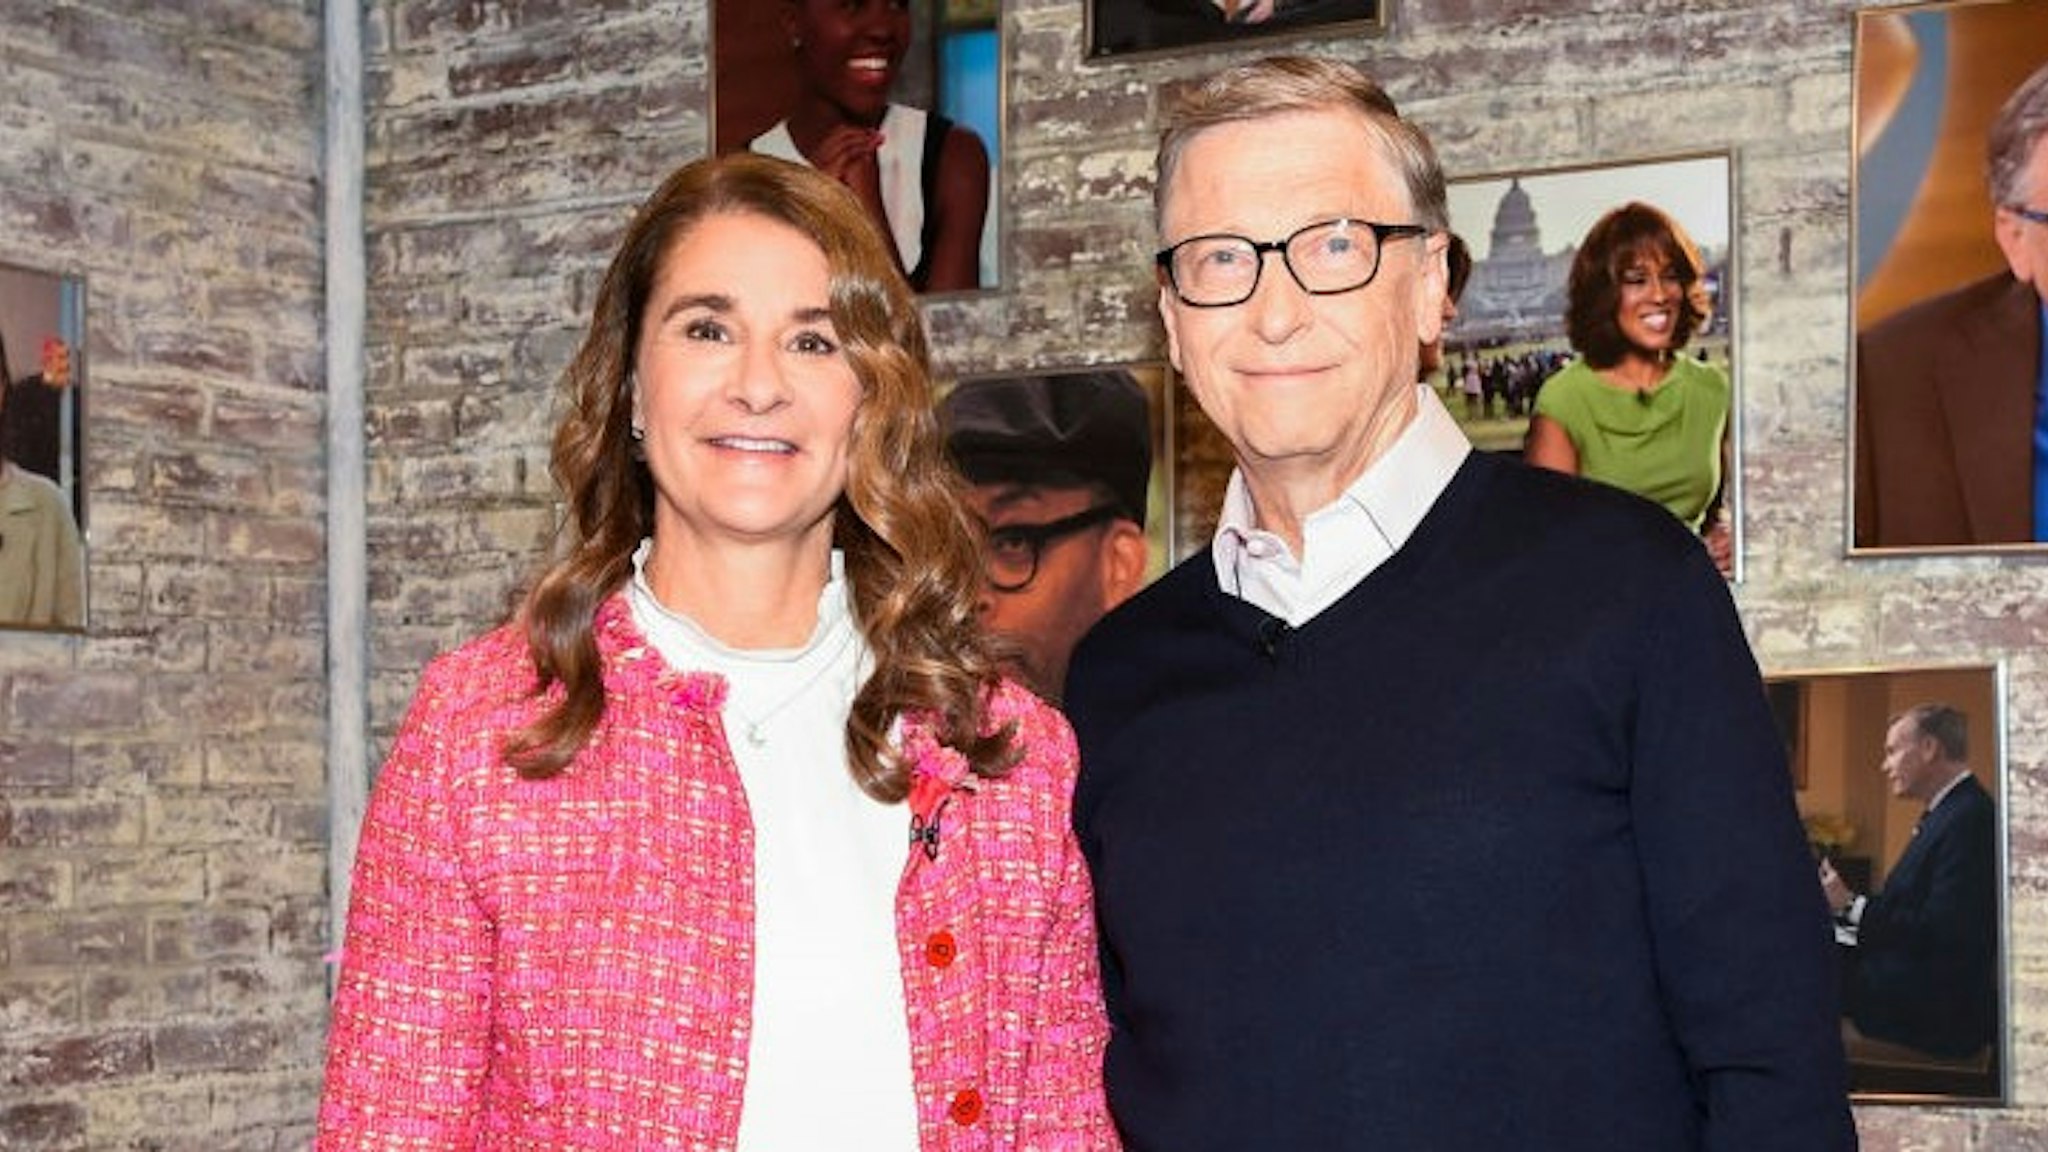 NEW YORK - FEBRUARY 12: Bill and Melinda Gates in the CBS Toyota Greenroom before their appearance on CBS THIS MORNING, Feb 12, 2019. (Photo by